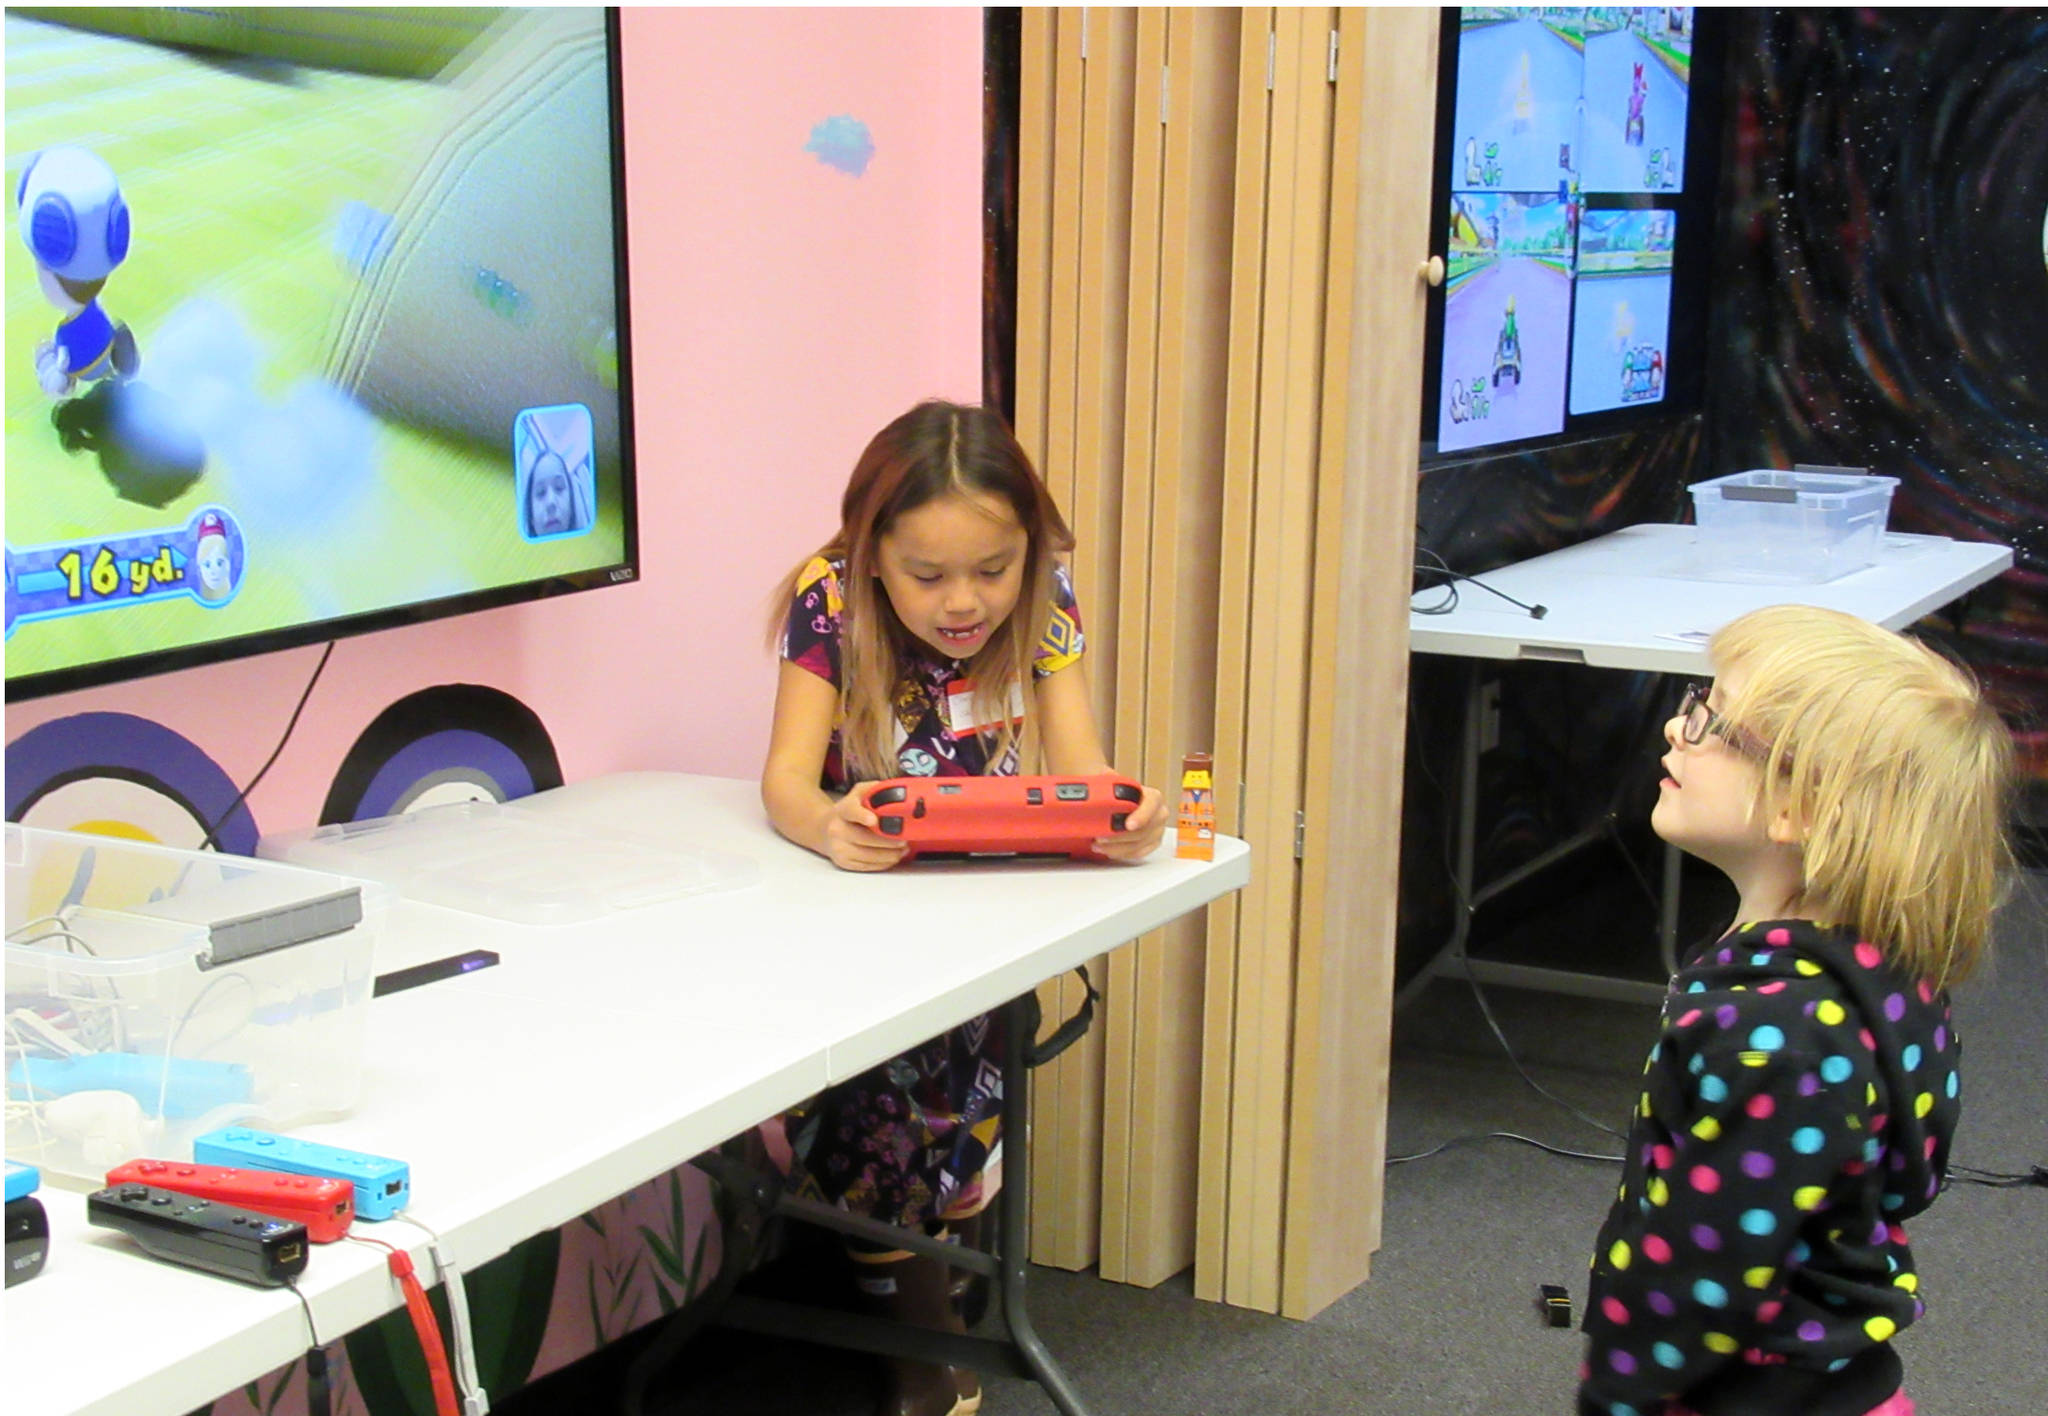 ChrisDee Scharen, 7, left, and Linden Harris, 4, right, play Wii U at Game On’s first Trans Gaming Night, Saturday, Feb. 23, 2019. (Ben Hohenstatt | Capital City Weekly)